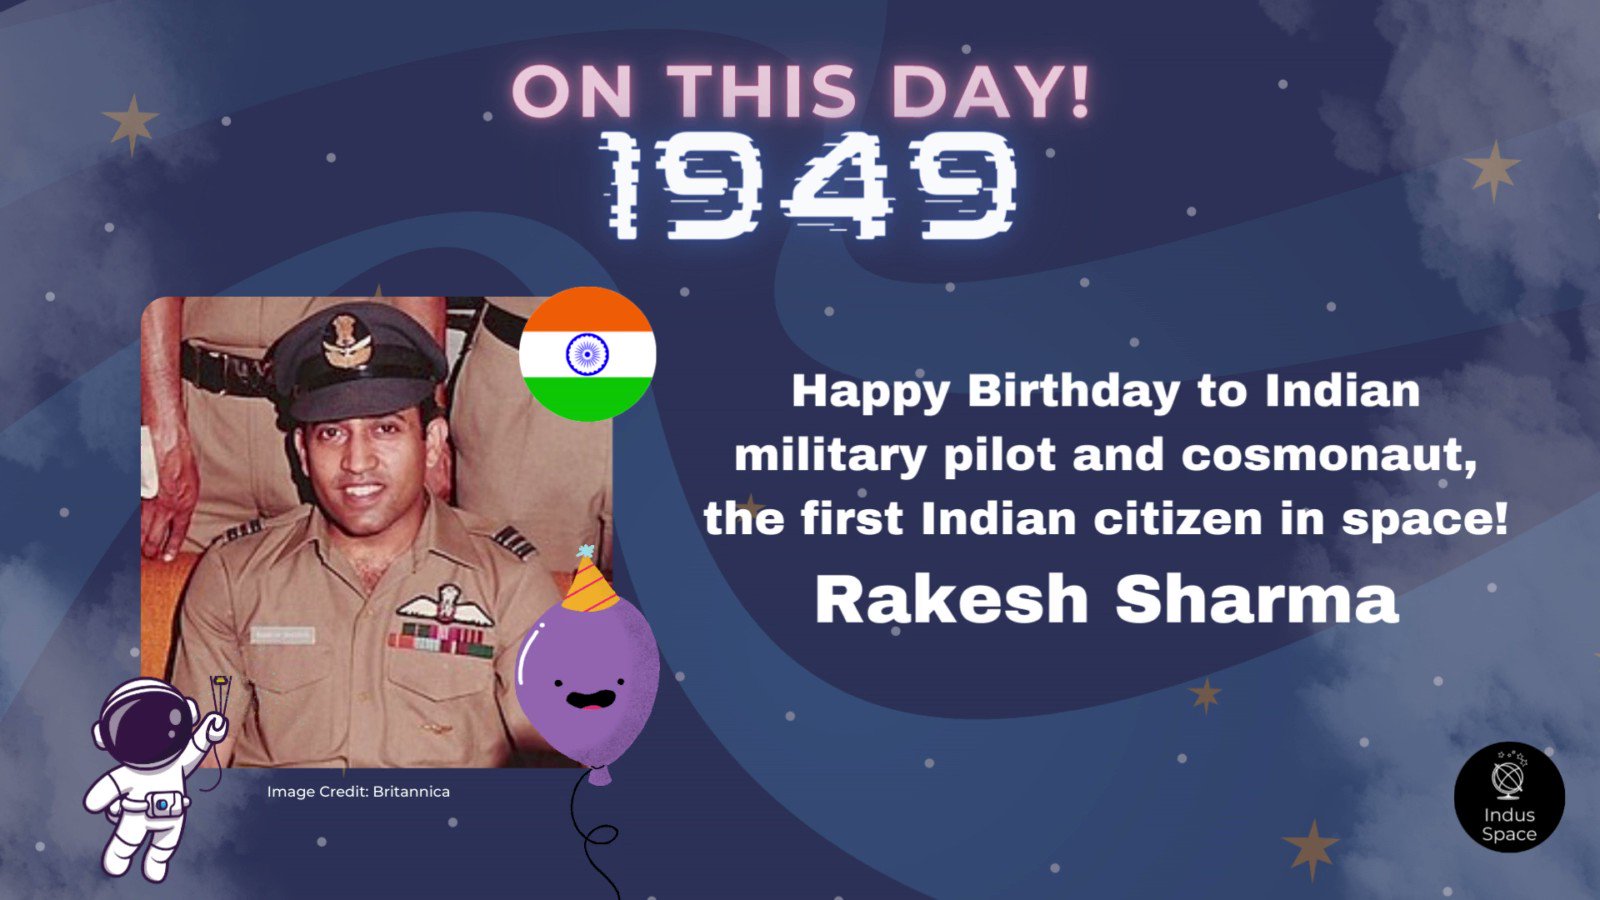 On this day, we wish a happy birthday to Rakesh Sharma, the first Indian citizen to go to space on April 3, 1984!  